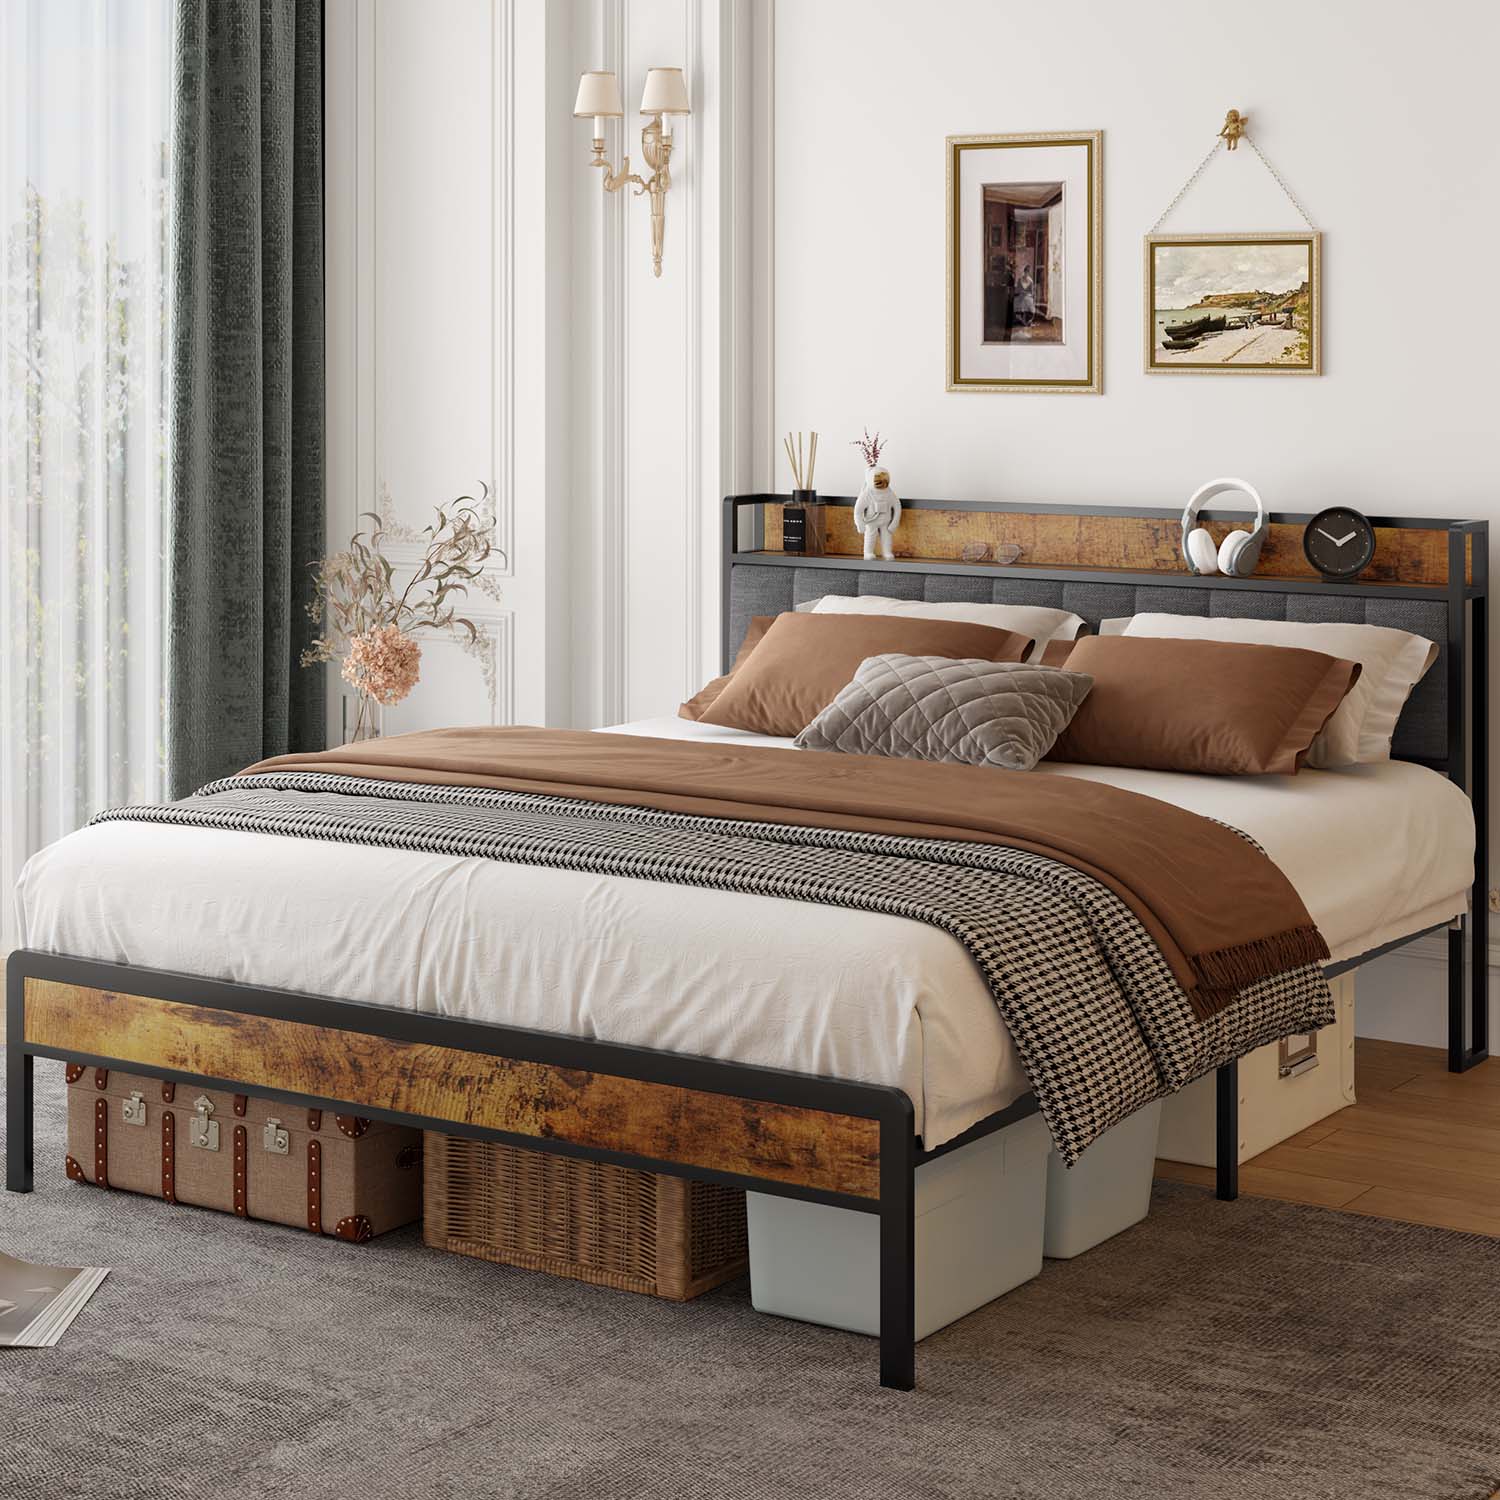 Gizoon BF22 Bed Frame with Storage Headboard & Large Under Storage